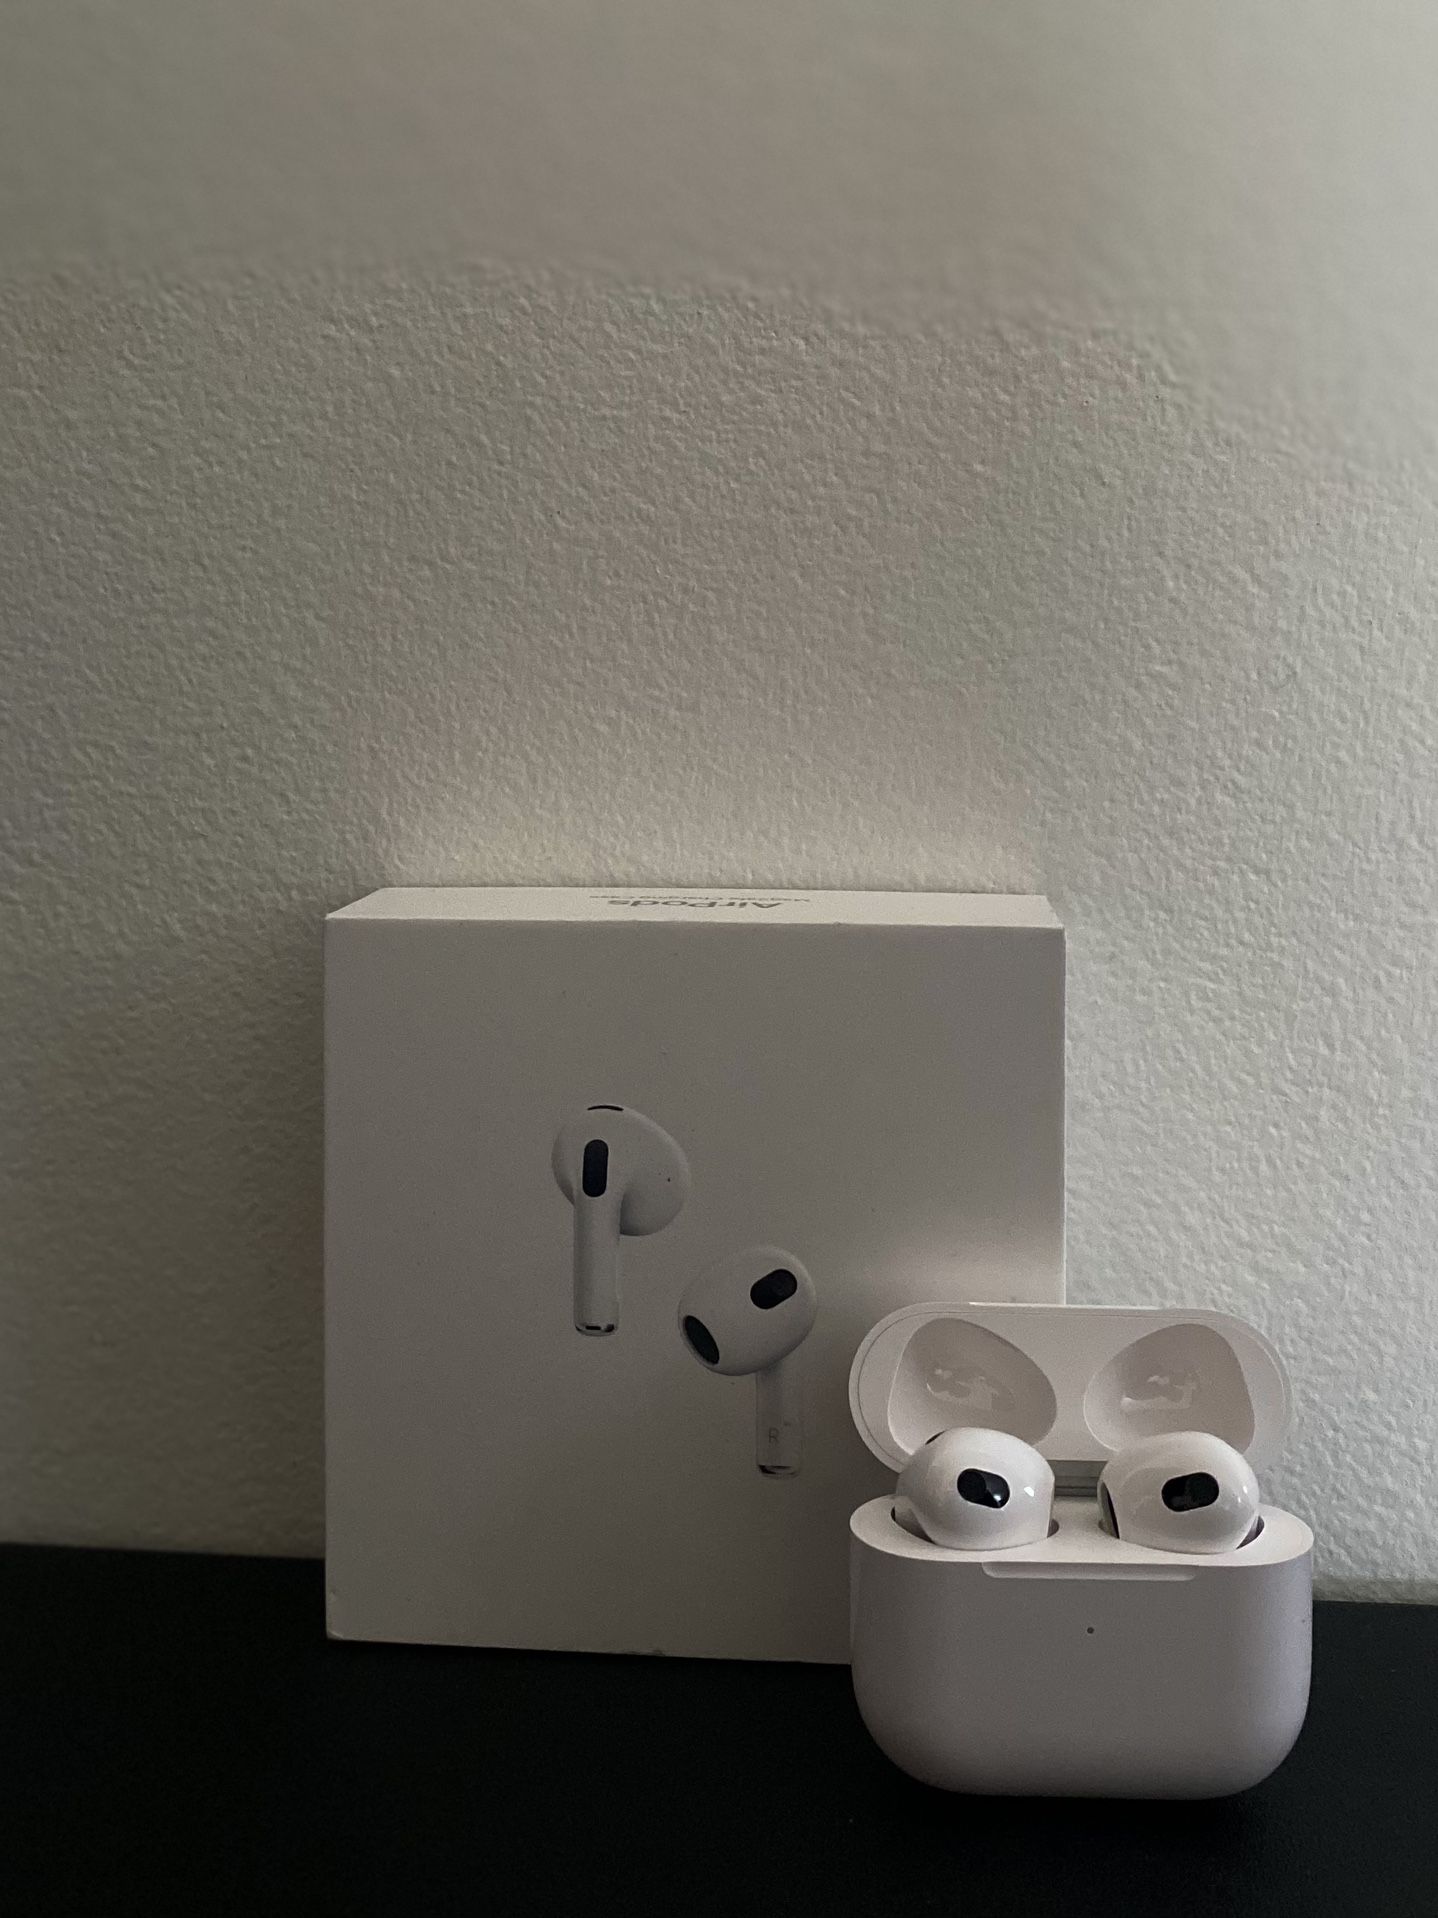 Apple Airpods (3rd Generation with Lightning Charging Case)